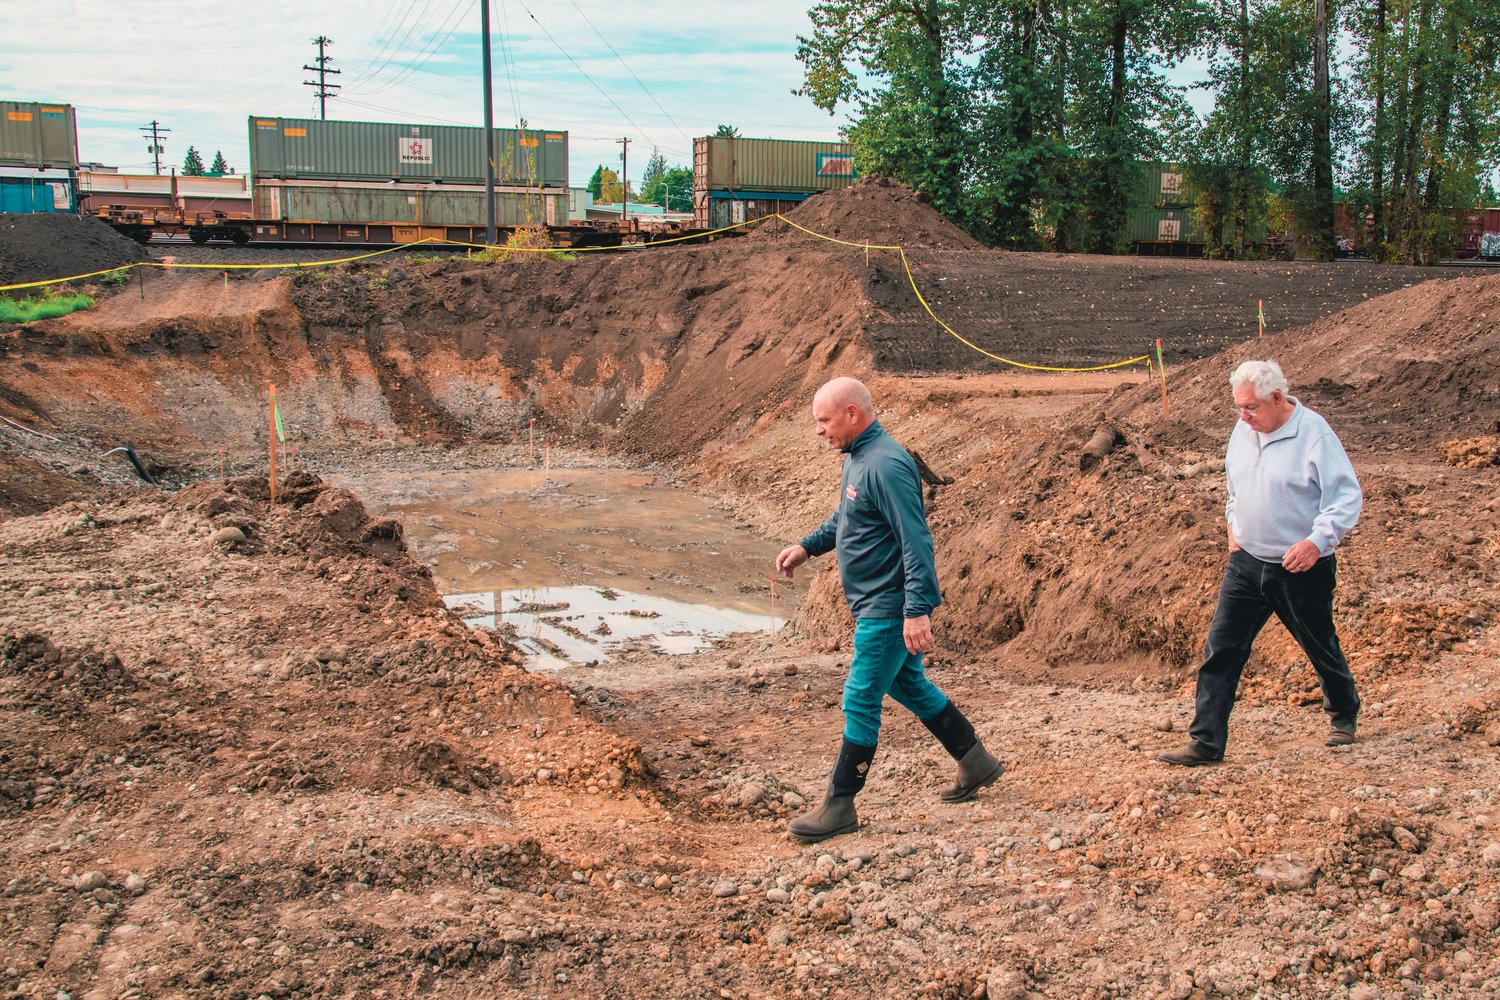 Kim Ashmore, with the City of Centralia, and former Centralia Mayor Lee Coumbs walk by a pit that will be used to feed overflow water back into China Creek, during a tour on Friday of the China Creek Project.